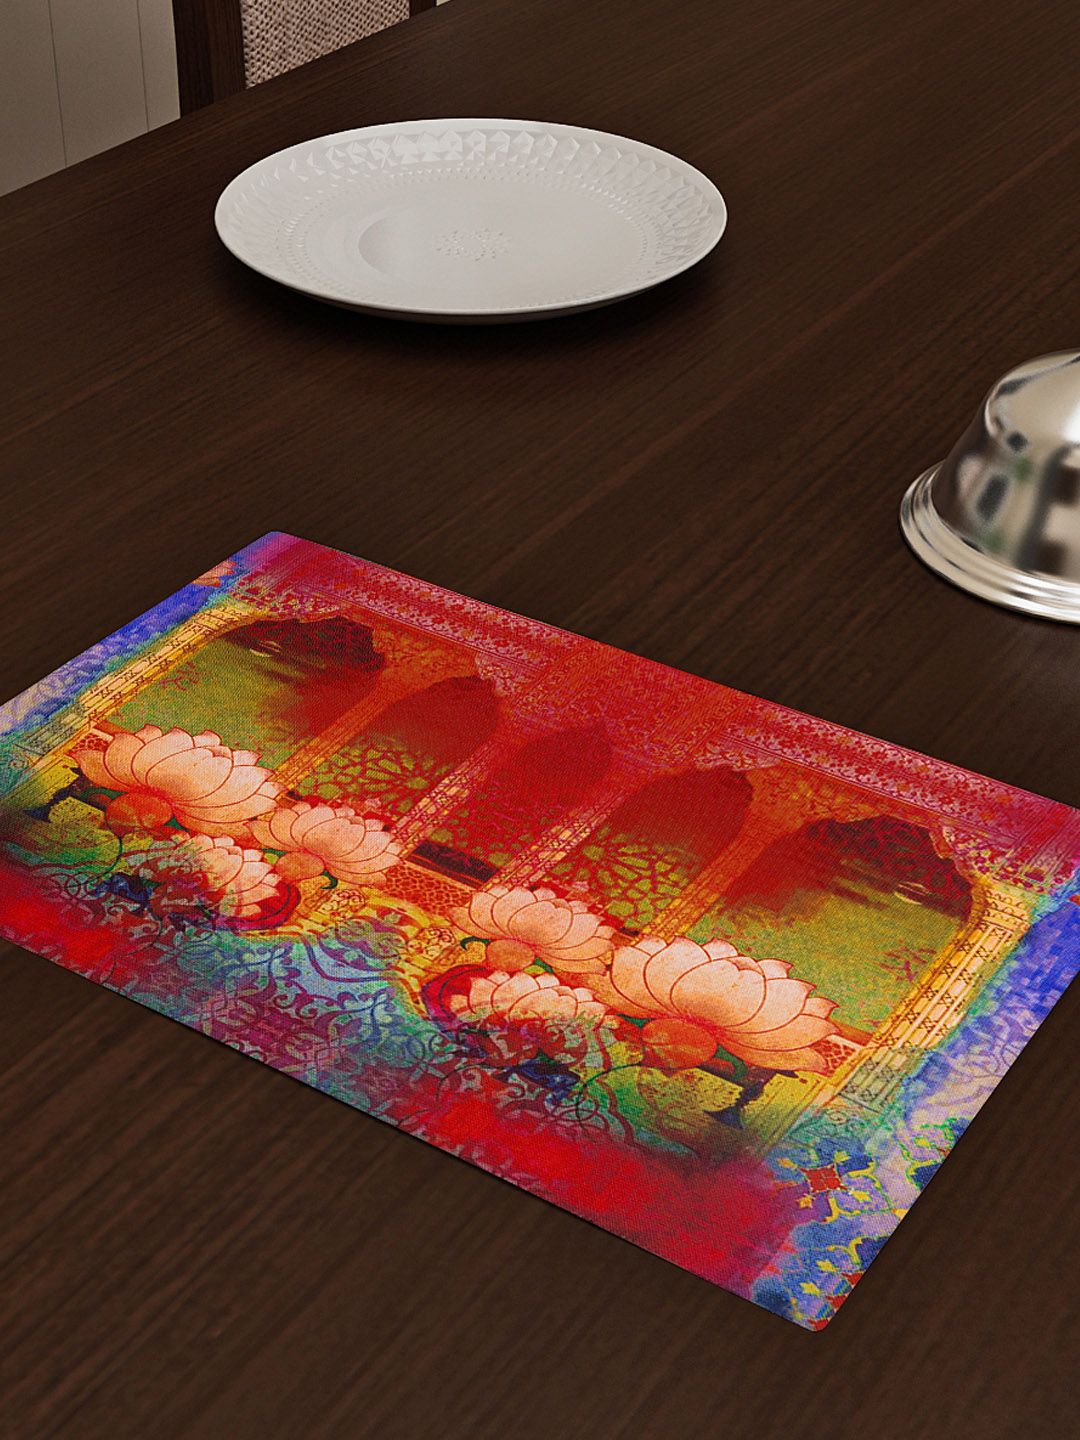 SEJ by Nisha Gupta Red Set of 6 Printed Table Placemats Price in India